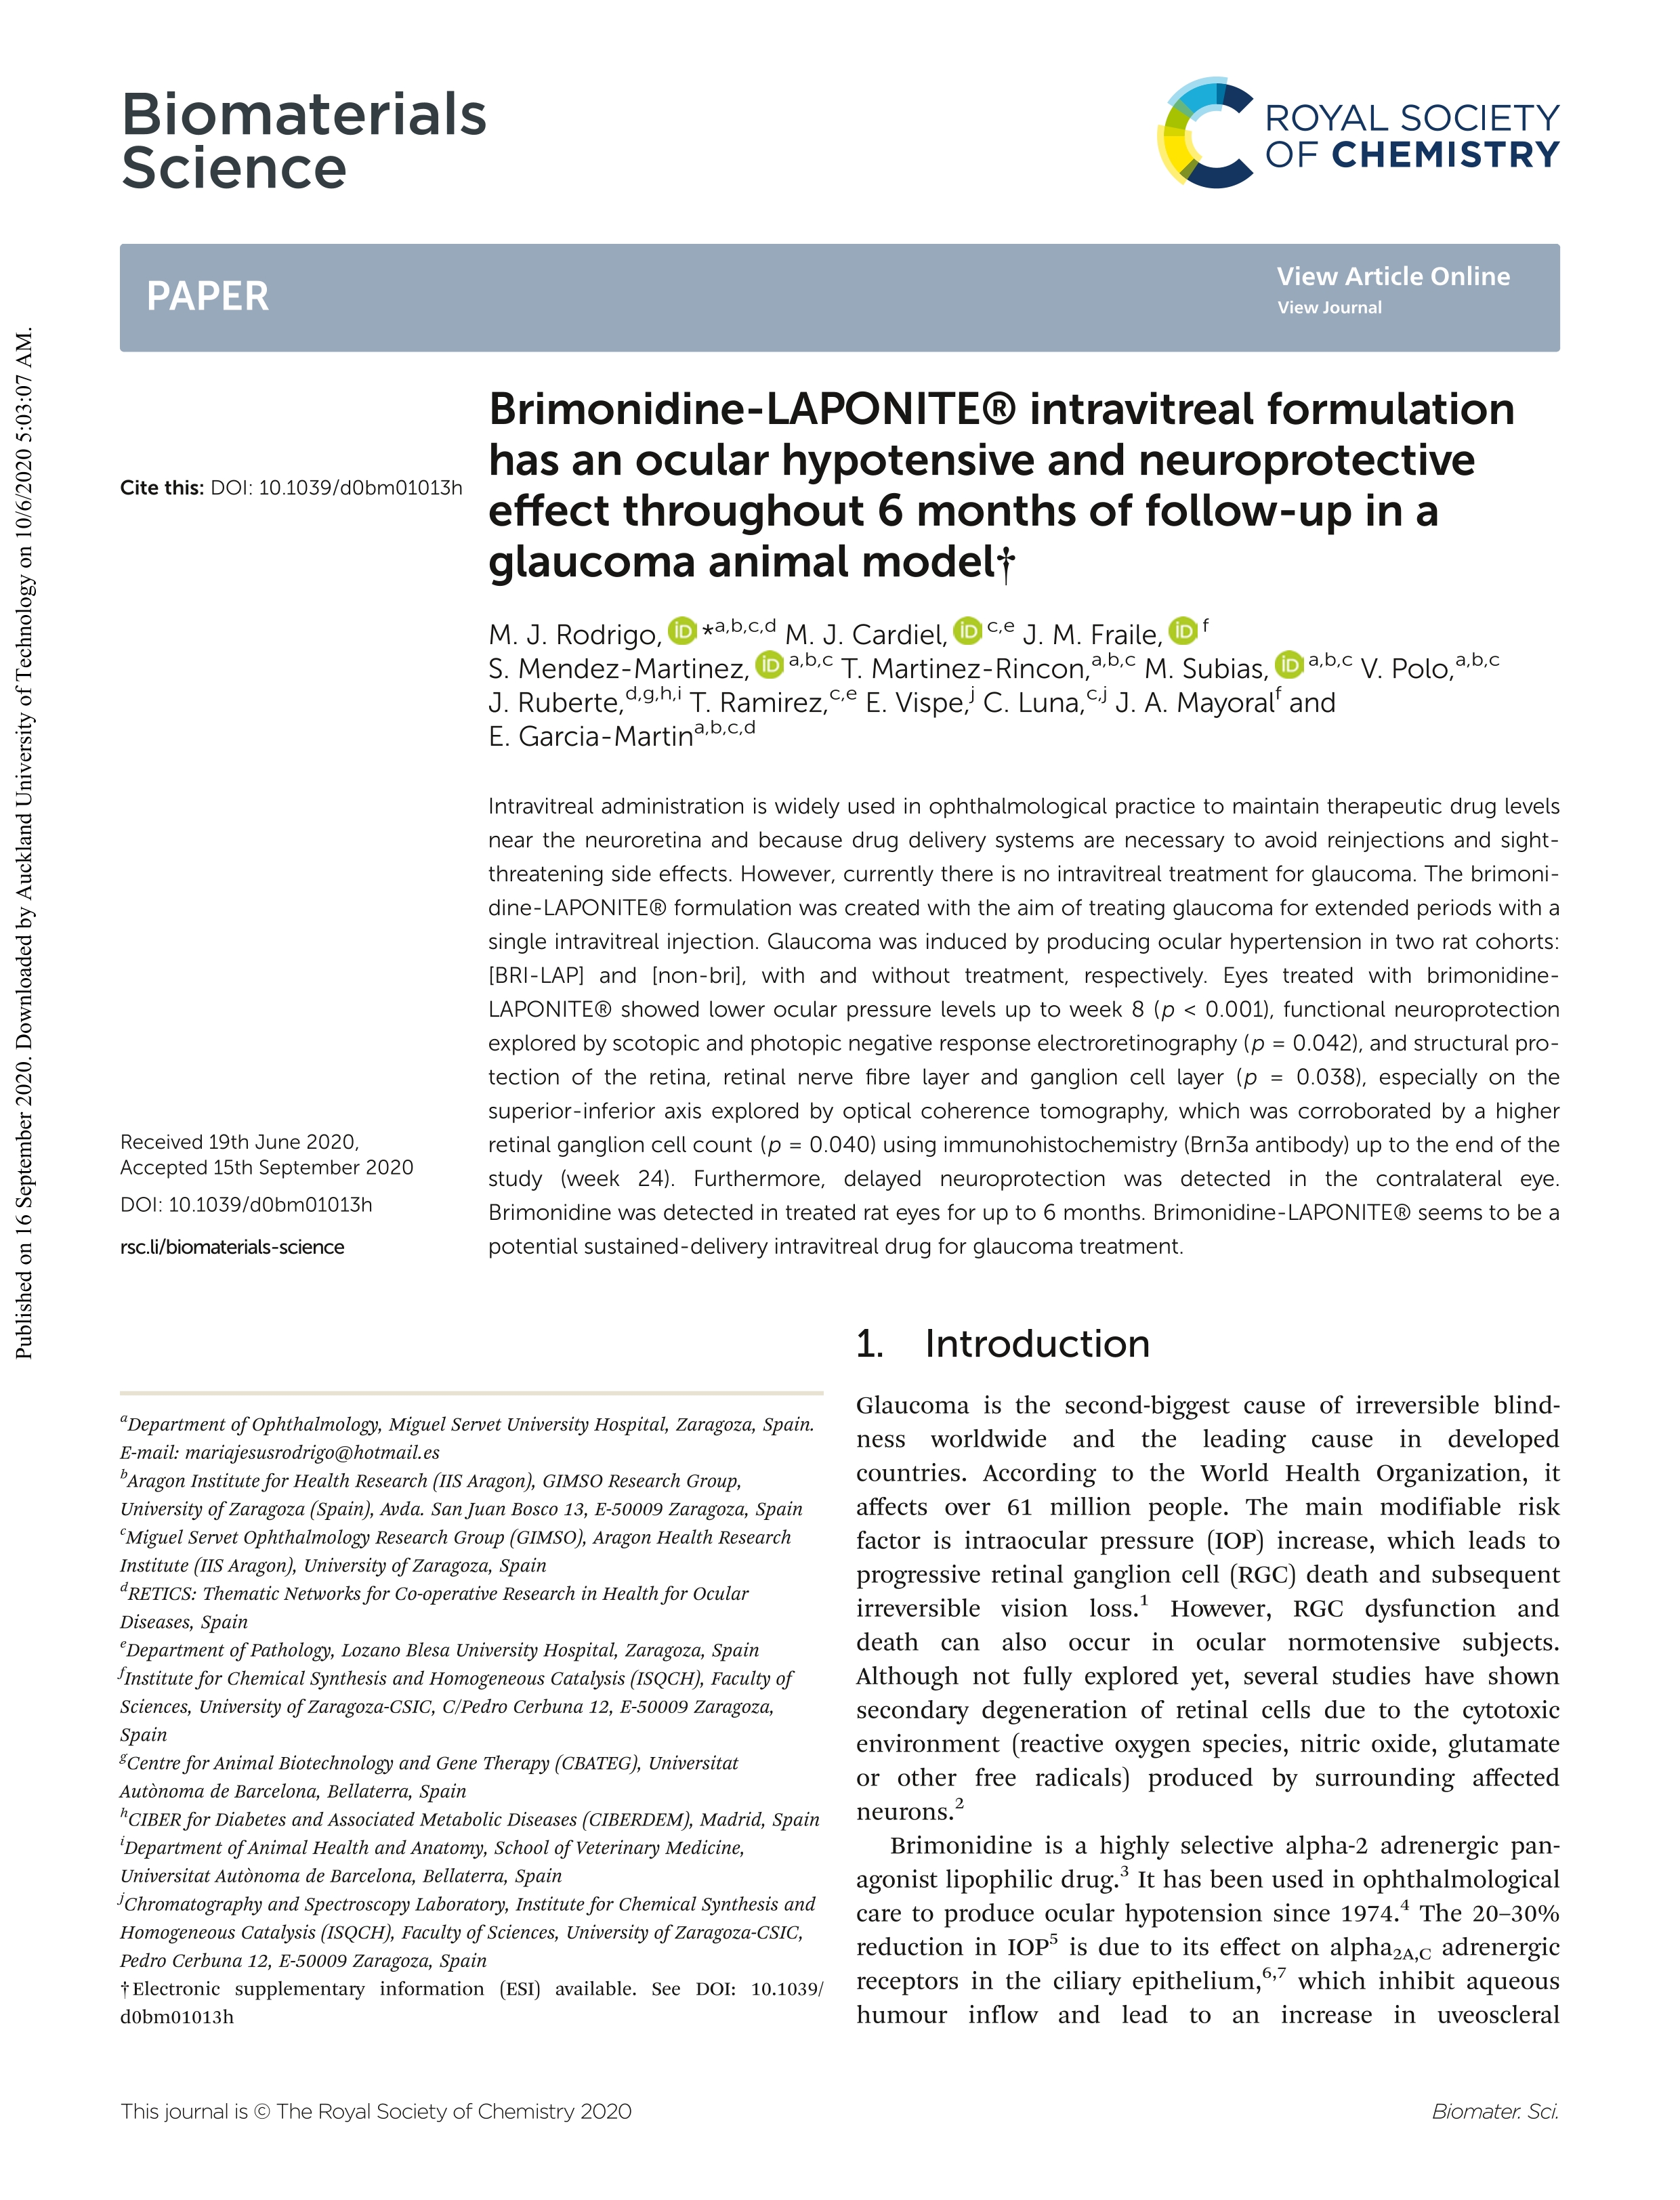 Brimonidine-LAPONITE® intravitreal formulation has an ocular hypotensive and neuroprotective effect throughout 6 months of follow-up in a glaucoma animal model